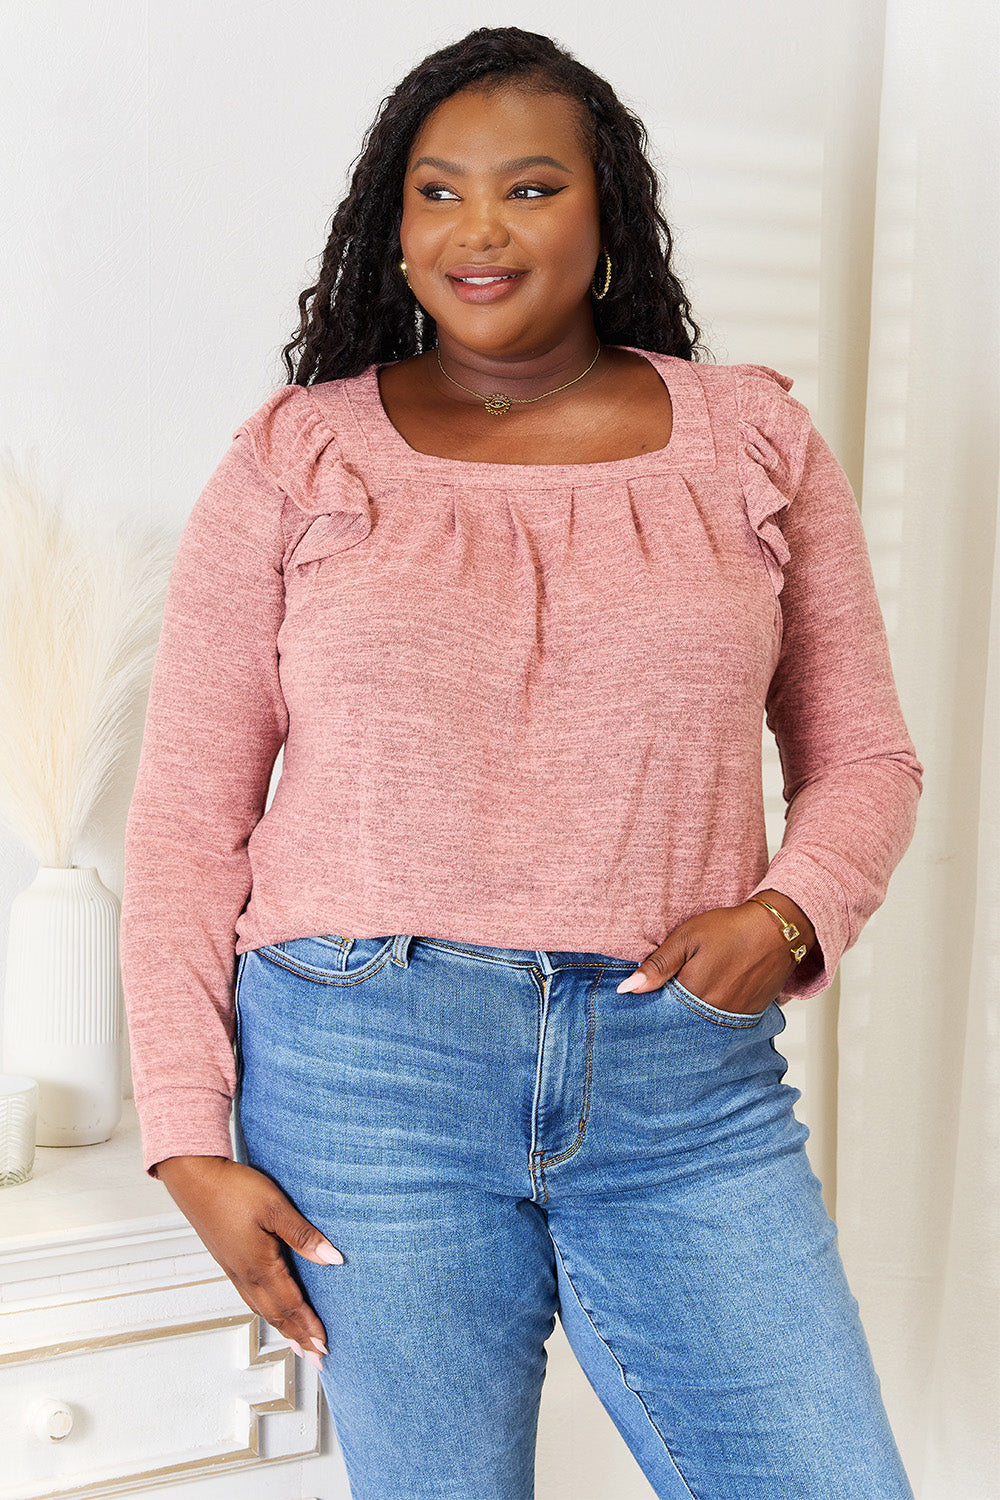 Square Neck Ruffle Shoulder Long Sleeve Top